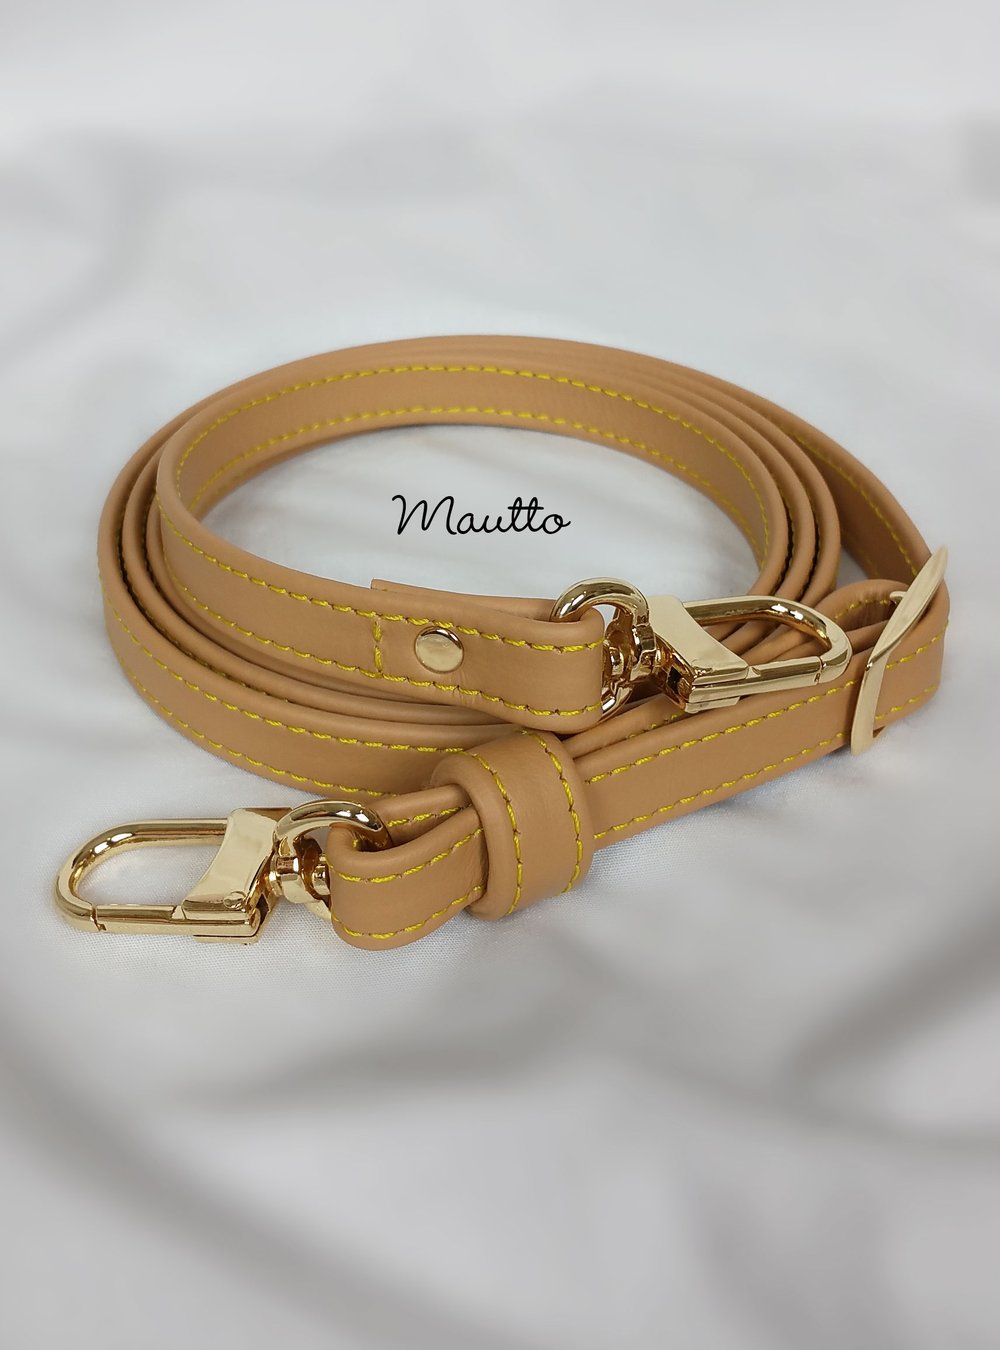 Light Tan Leather Strap with Yellow Stitching for Louis Vuitton (LV),  Coach, More - .5 Petite Width, Replacement Purse Straps & Handbag  Accessories - Leather, Chain & more